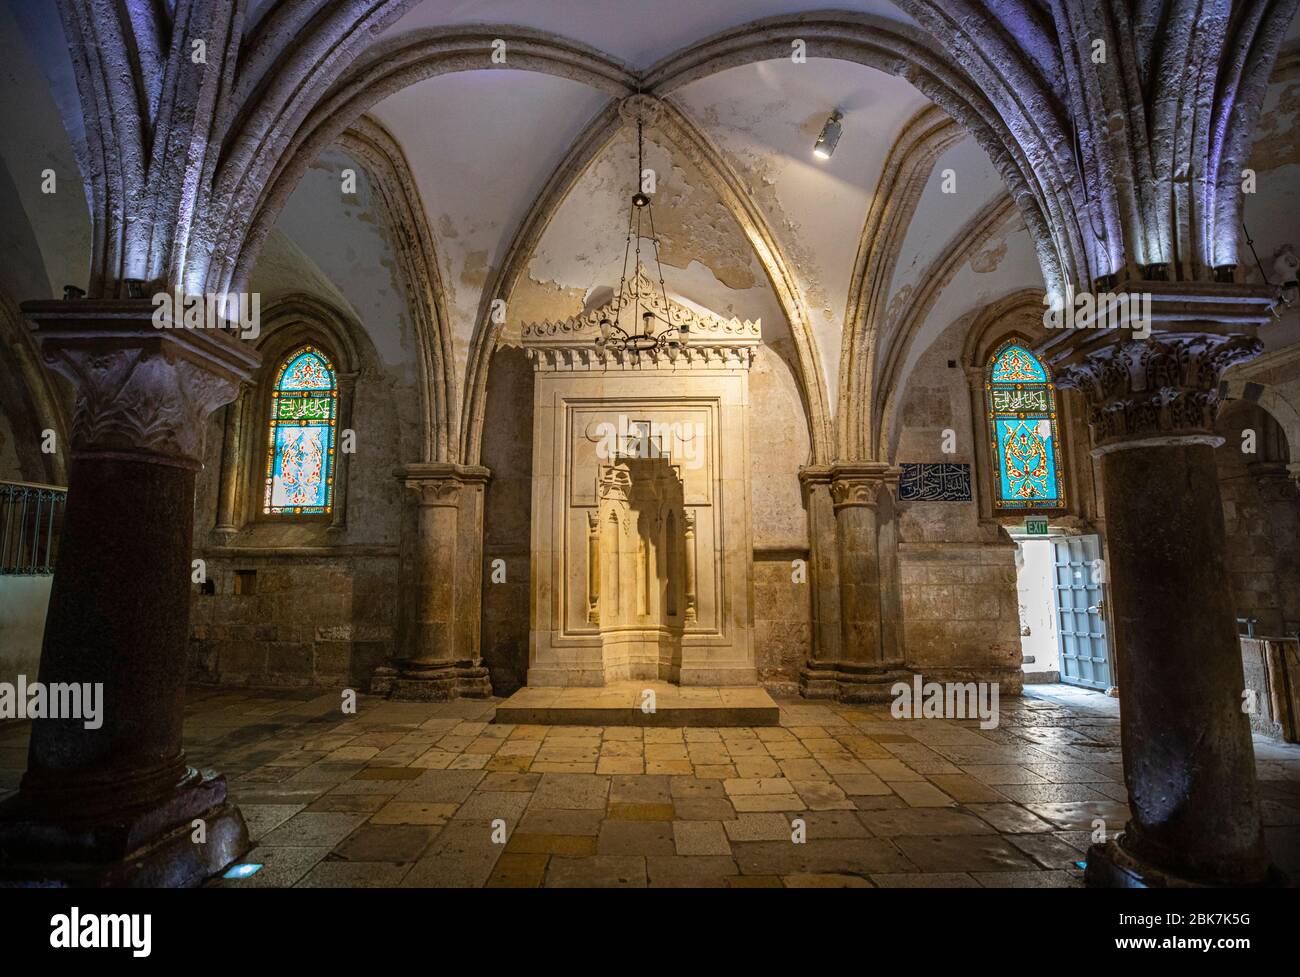 The Cenacle, Room of the Last Supper, of King David's Tomb in Jerusalem, Israel Stock Photo